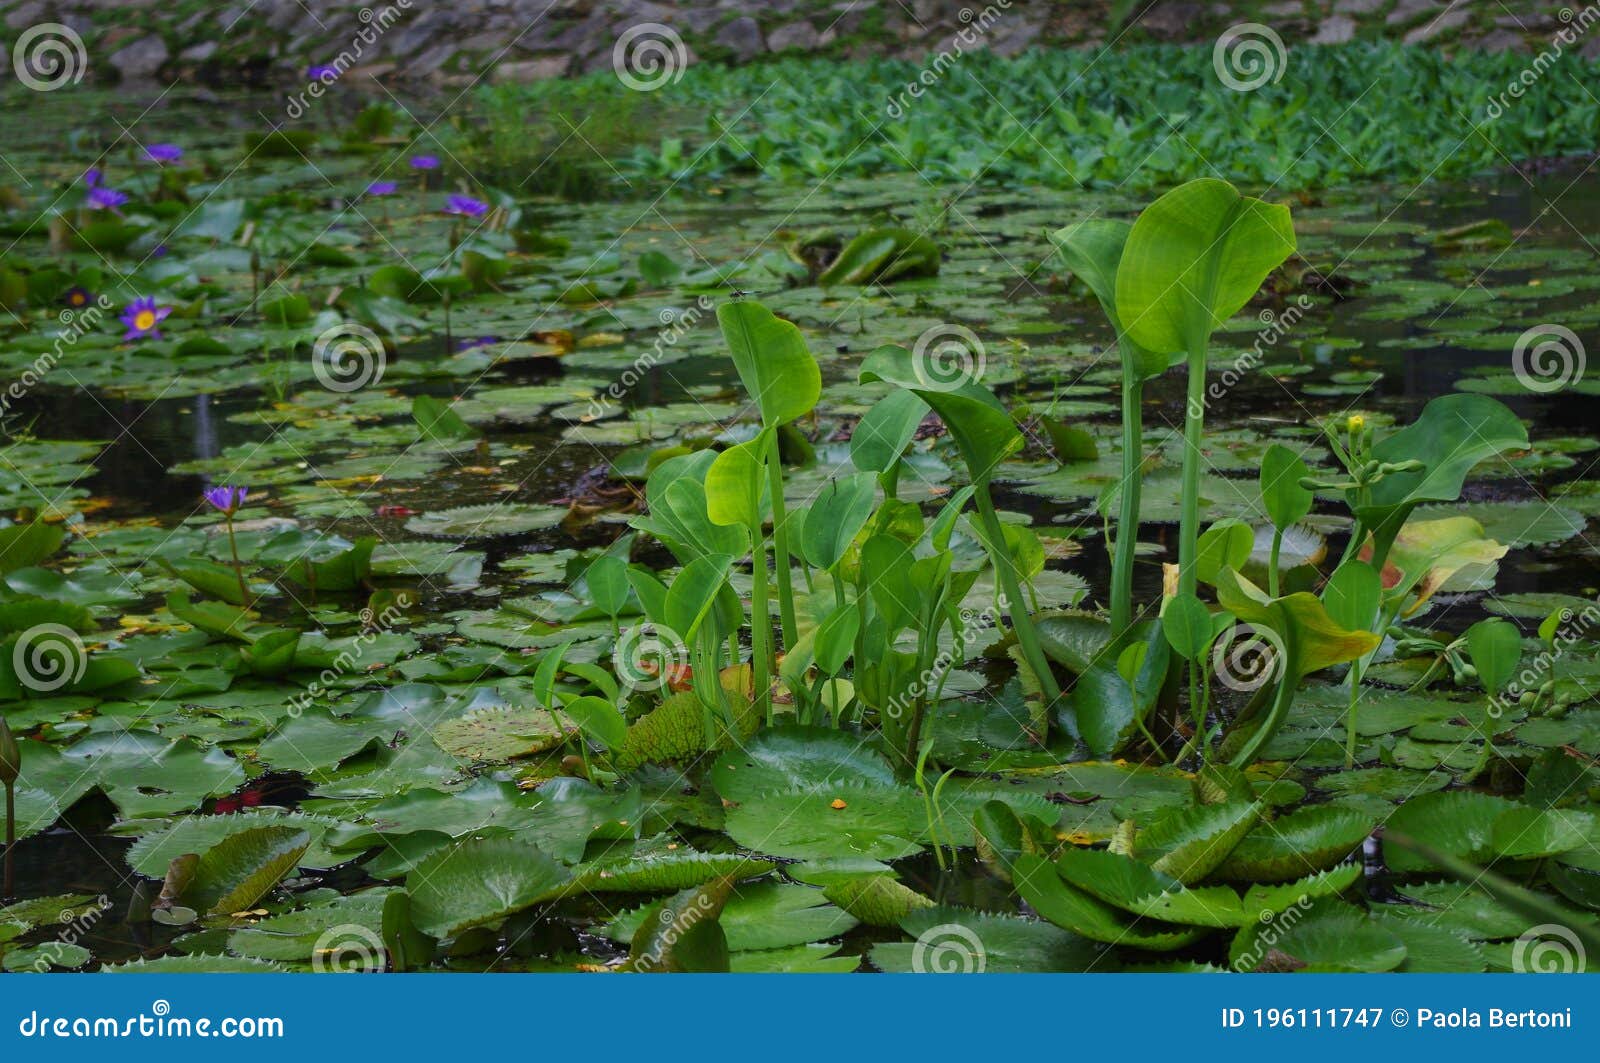 water liles and other plants in a lake